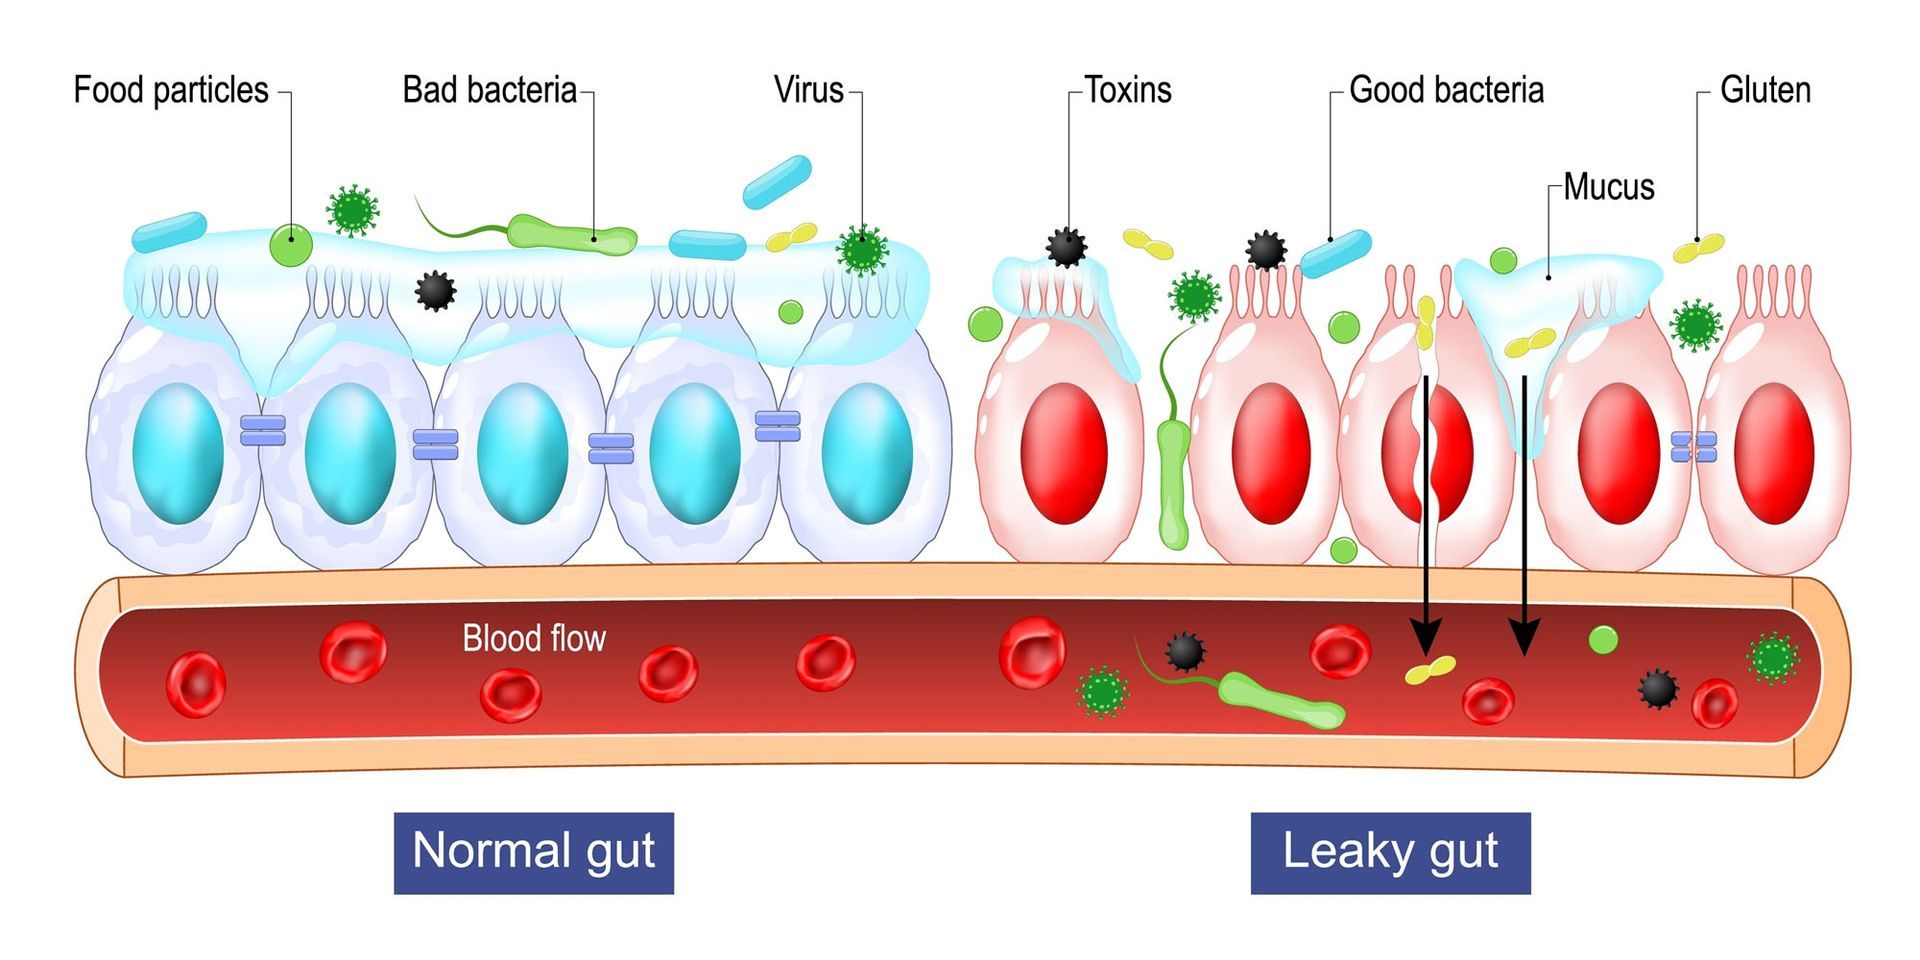 Leaky Gut Help: How To Identify, Heal, Rebuild, and Repair Your Leaky Gut